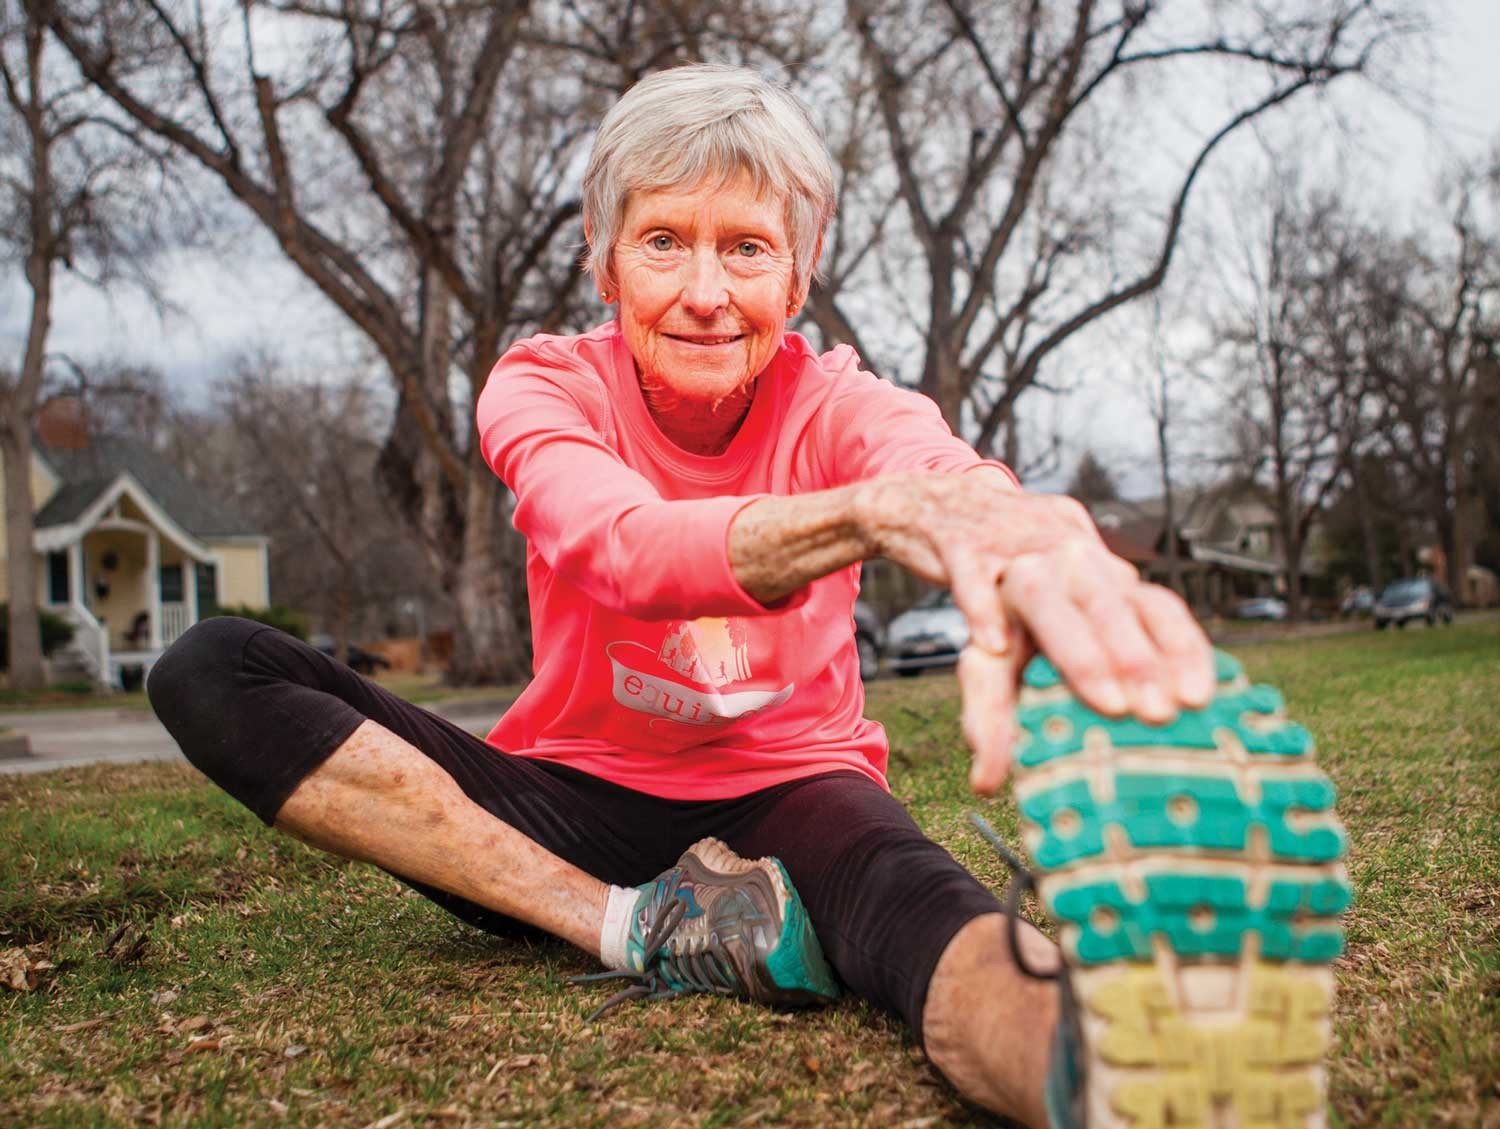 Global Run Challenge Profile: Libby James is the fastest 80 plus woman in the world